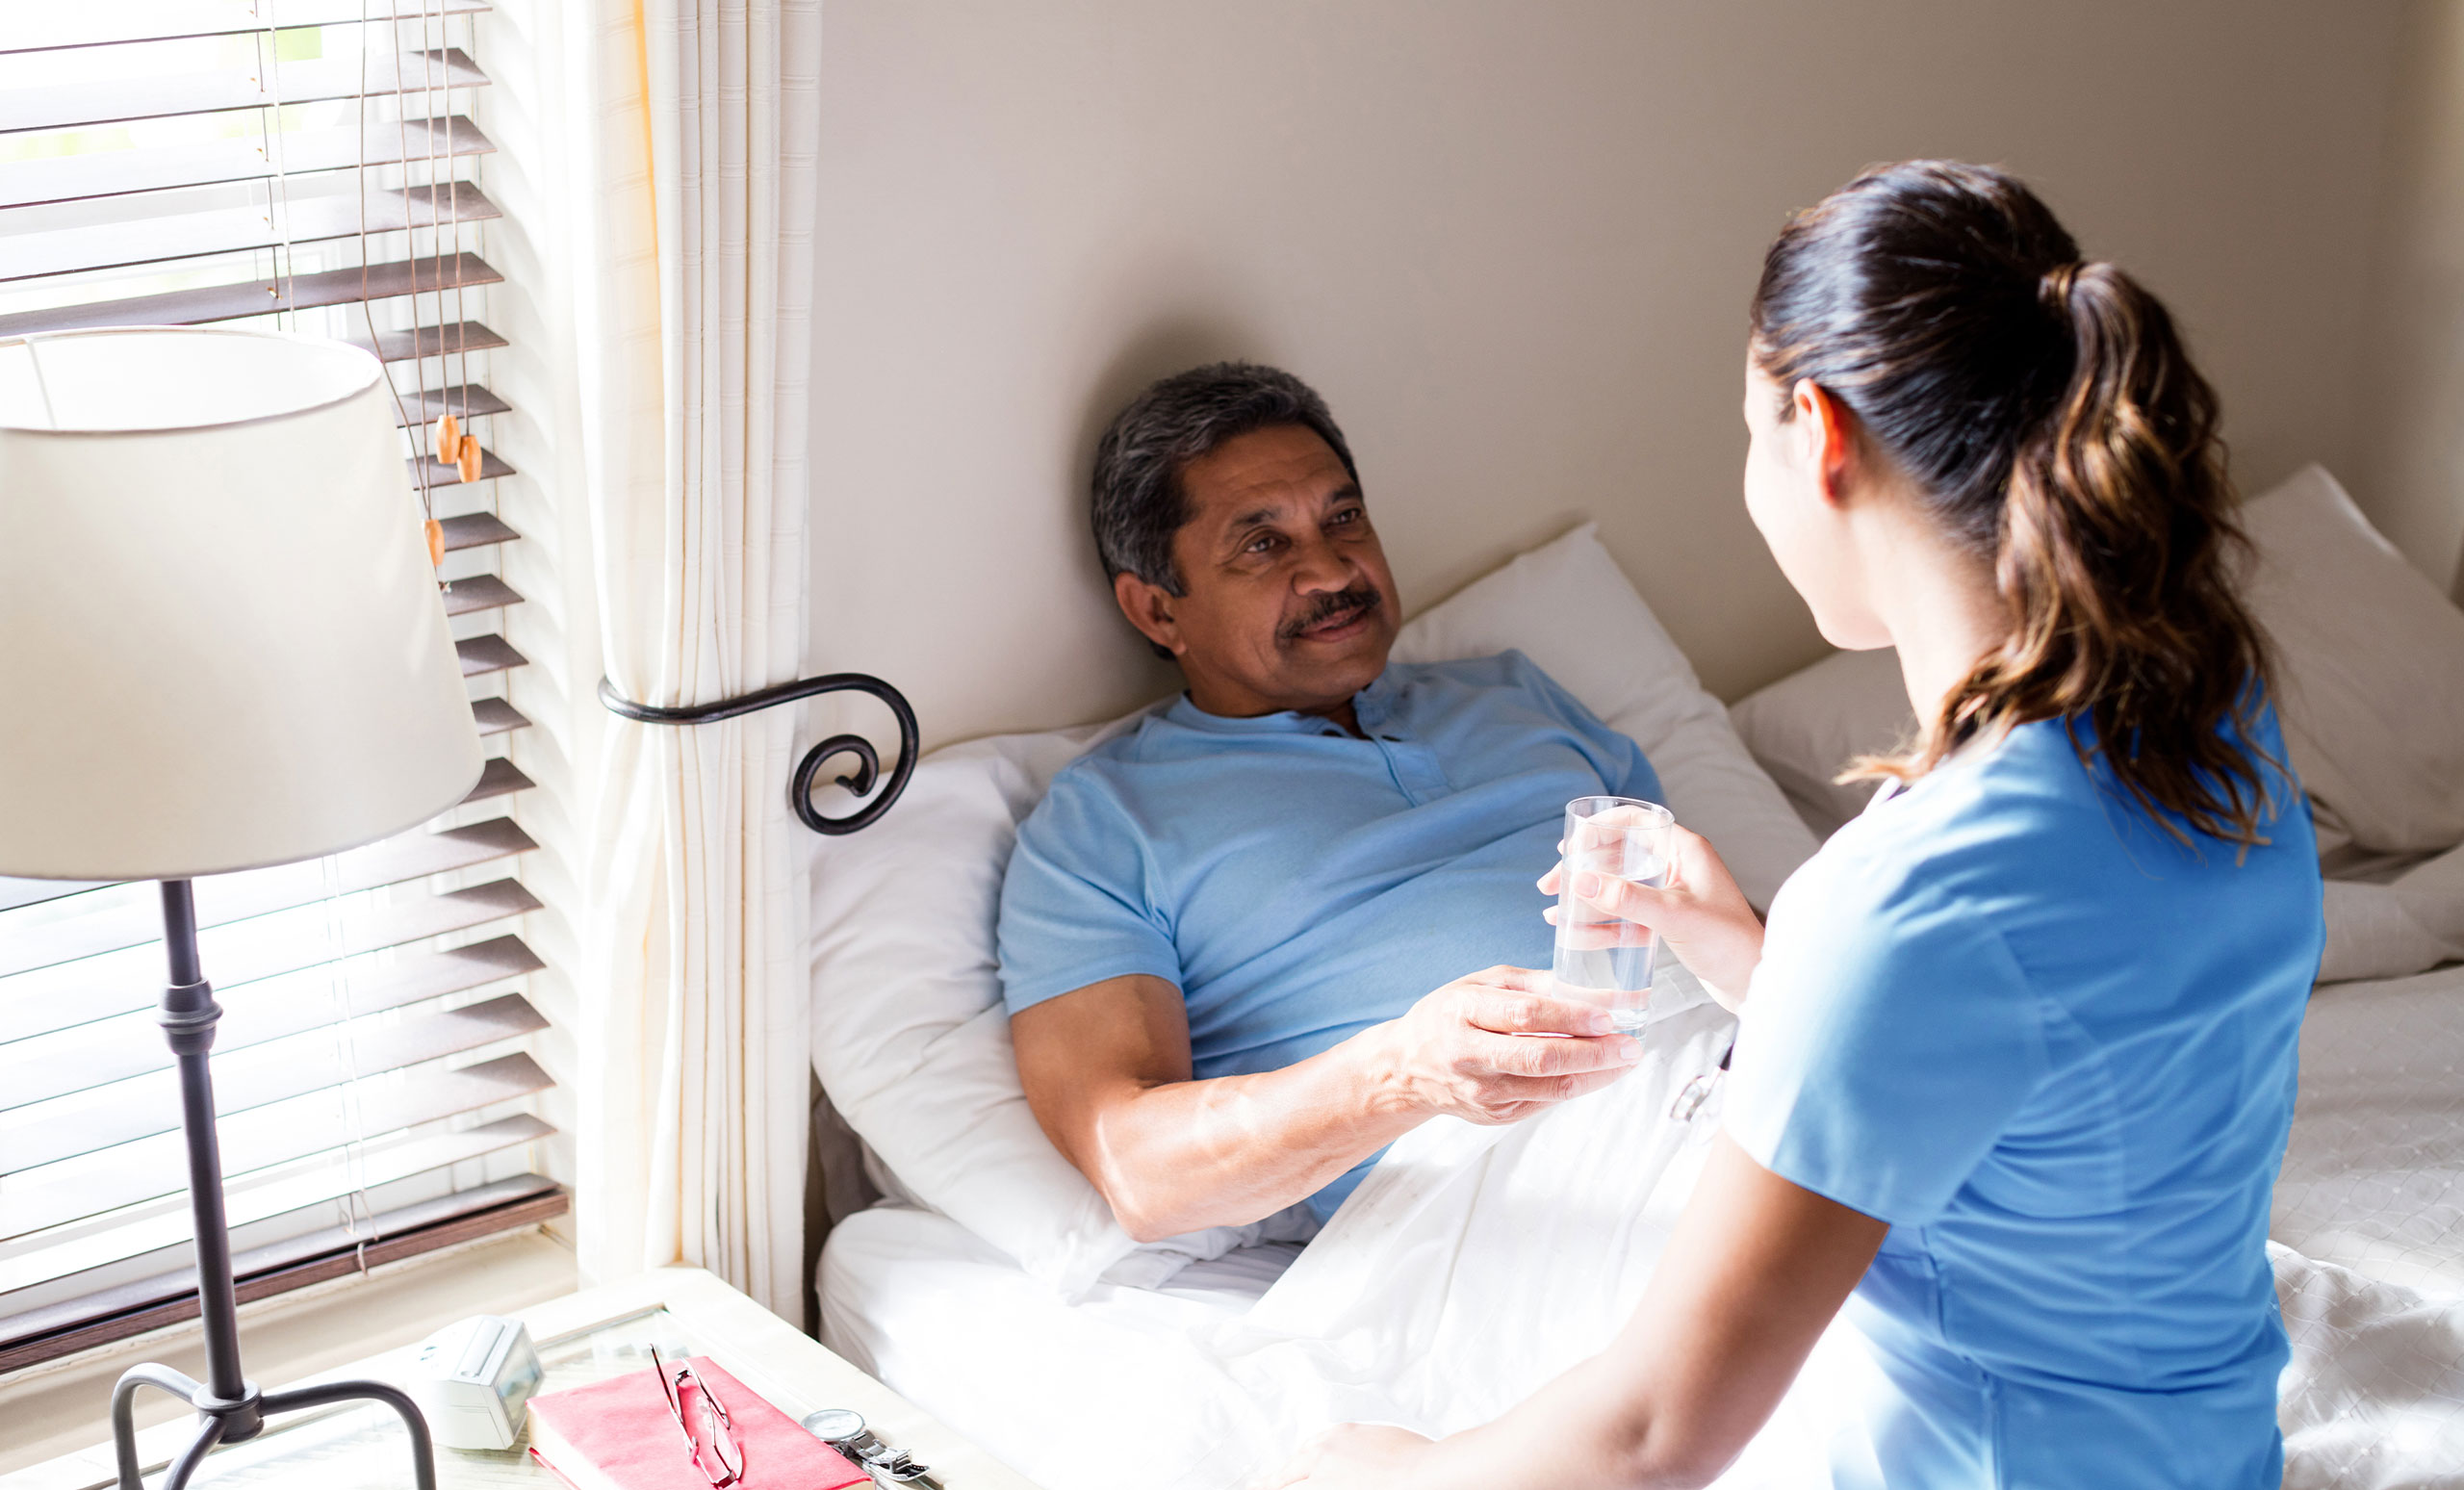 transition of care from hospital to home